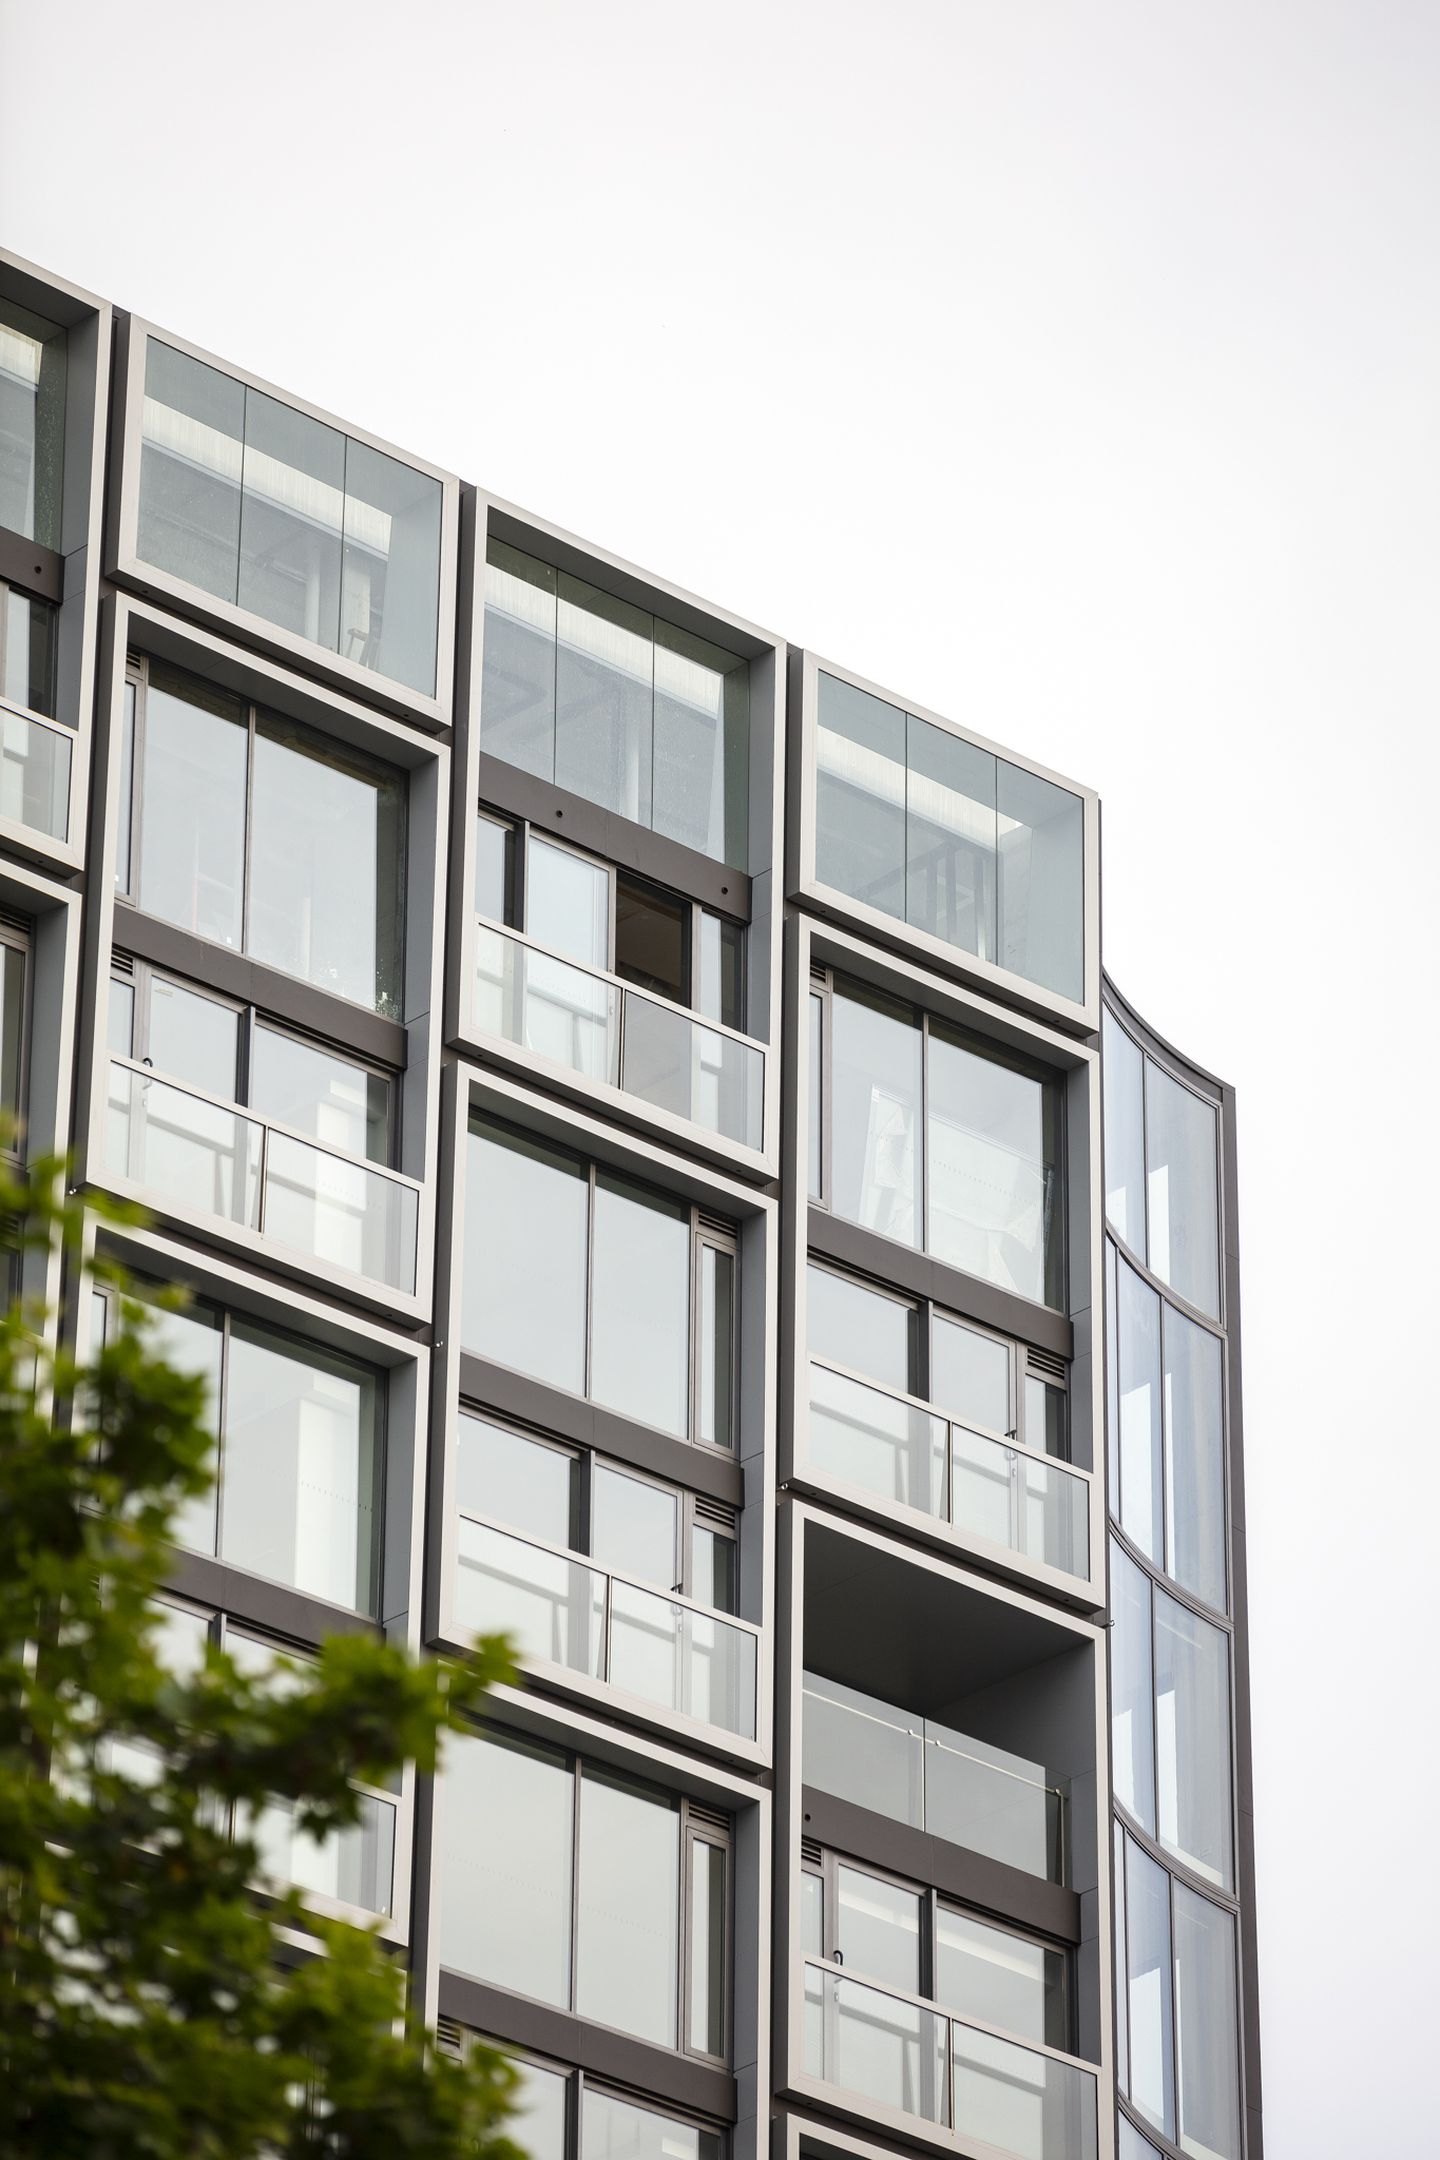 Omnia Potts Point apartments designed by Durbach Block Jaggers Architects Sydney